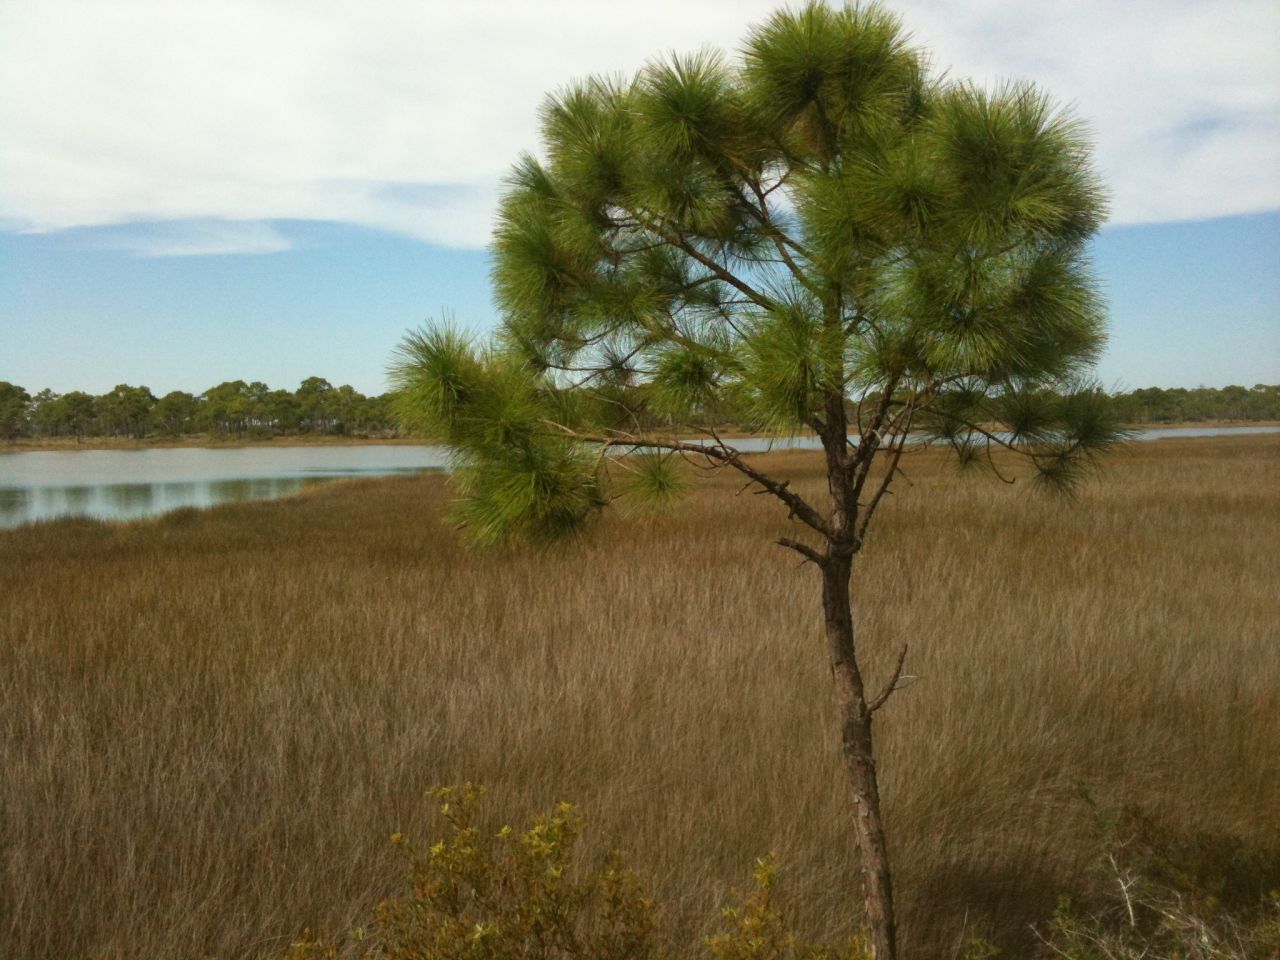 A lone pine stands guard over the marsh, a vital part of the maritime ecosystem here.